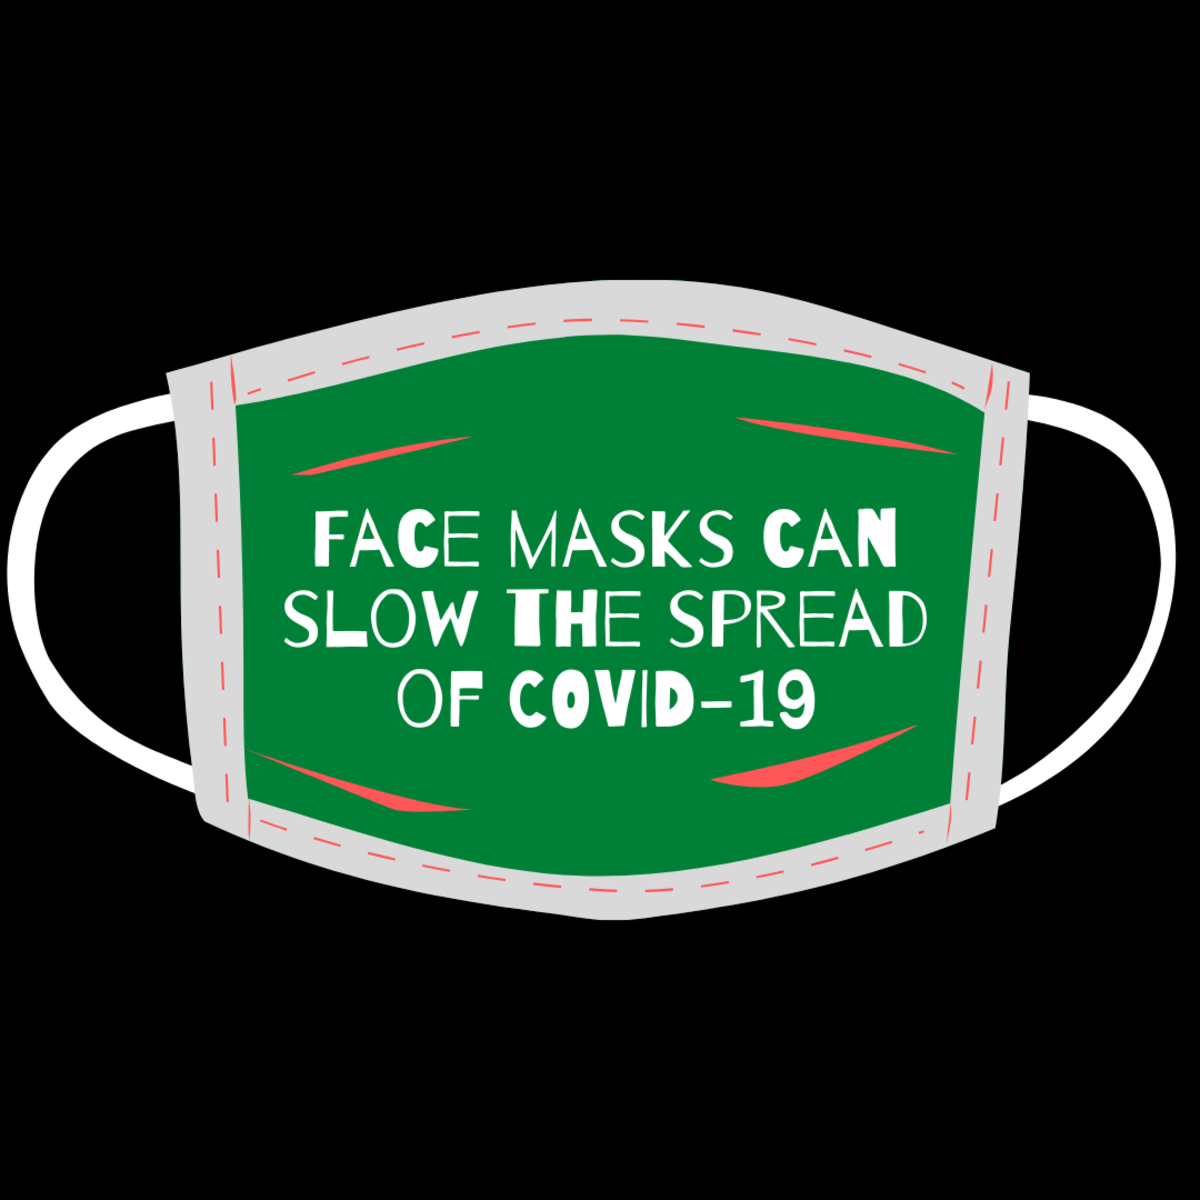 Wearing face masks can greatly slow the spread of COVID-19